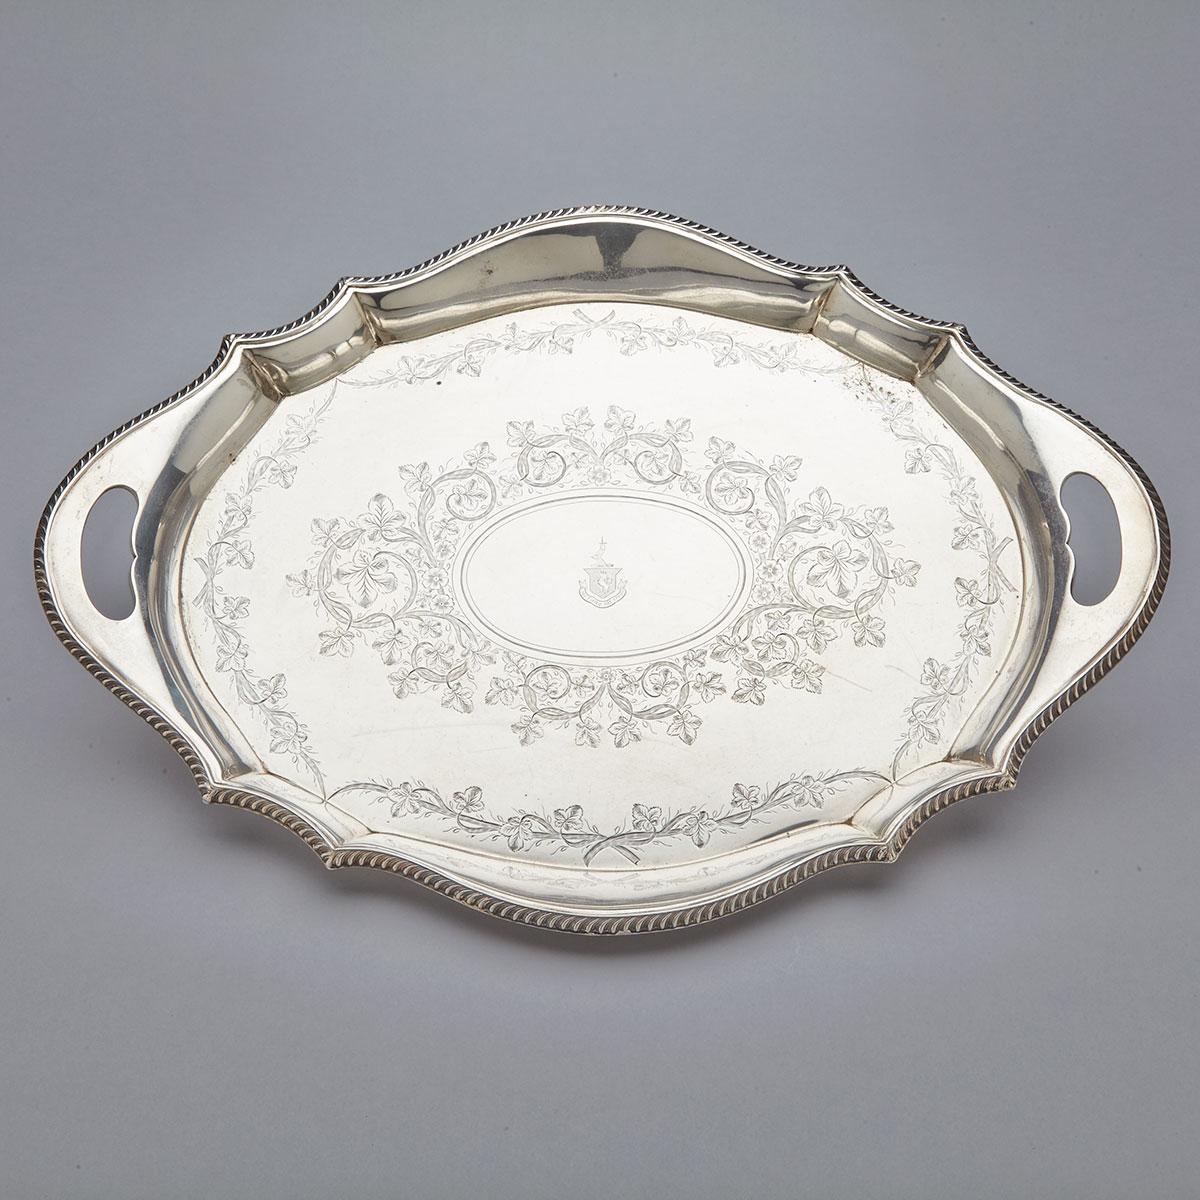 English Silver Two-Handled Oval Serving Tray, John Round, Sheffield, 1911